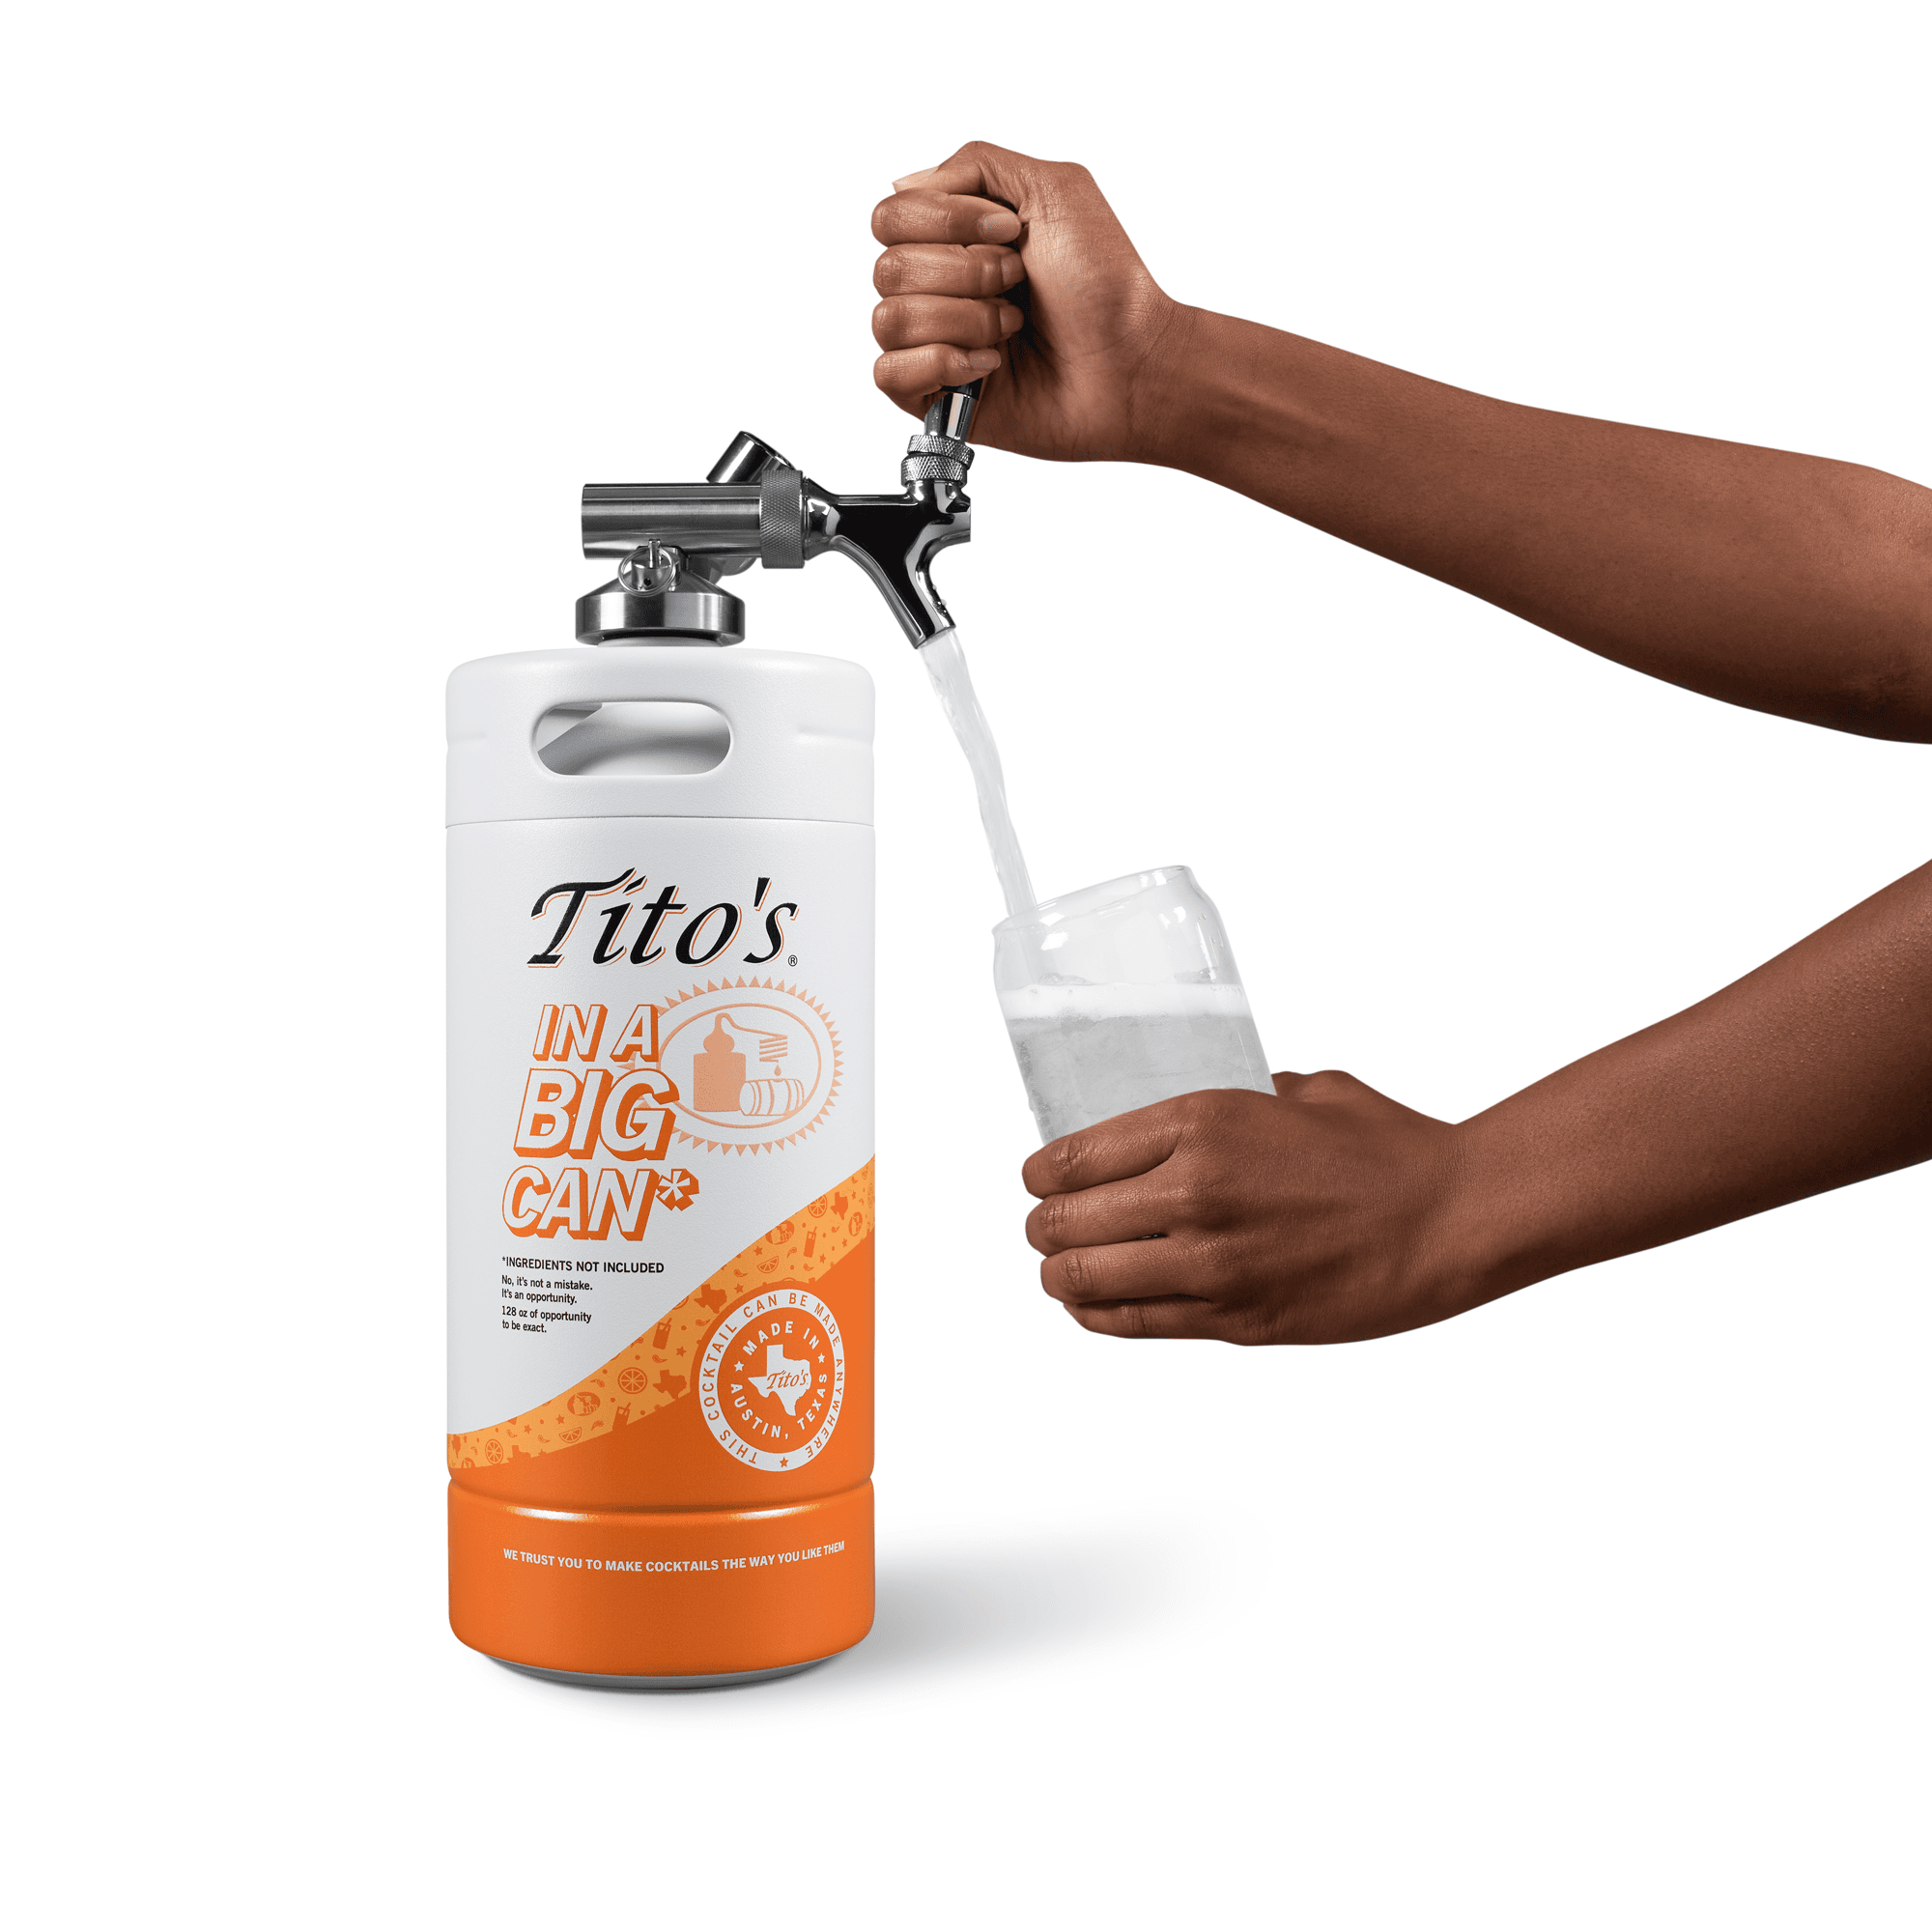 Pouring a cocktail from Tito's in a Big Can*